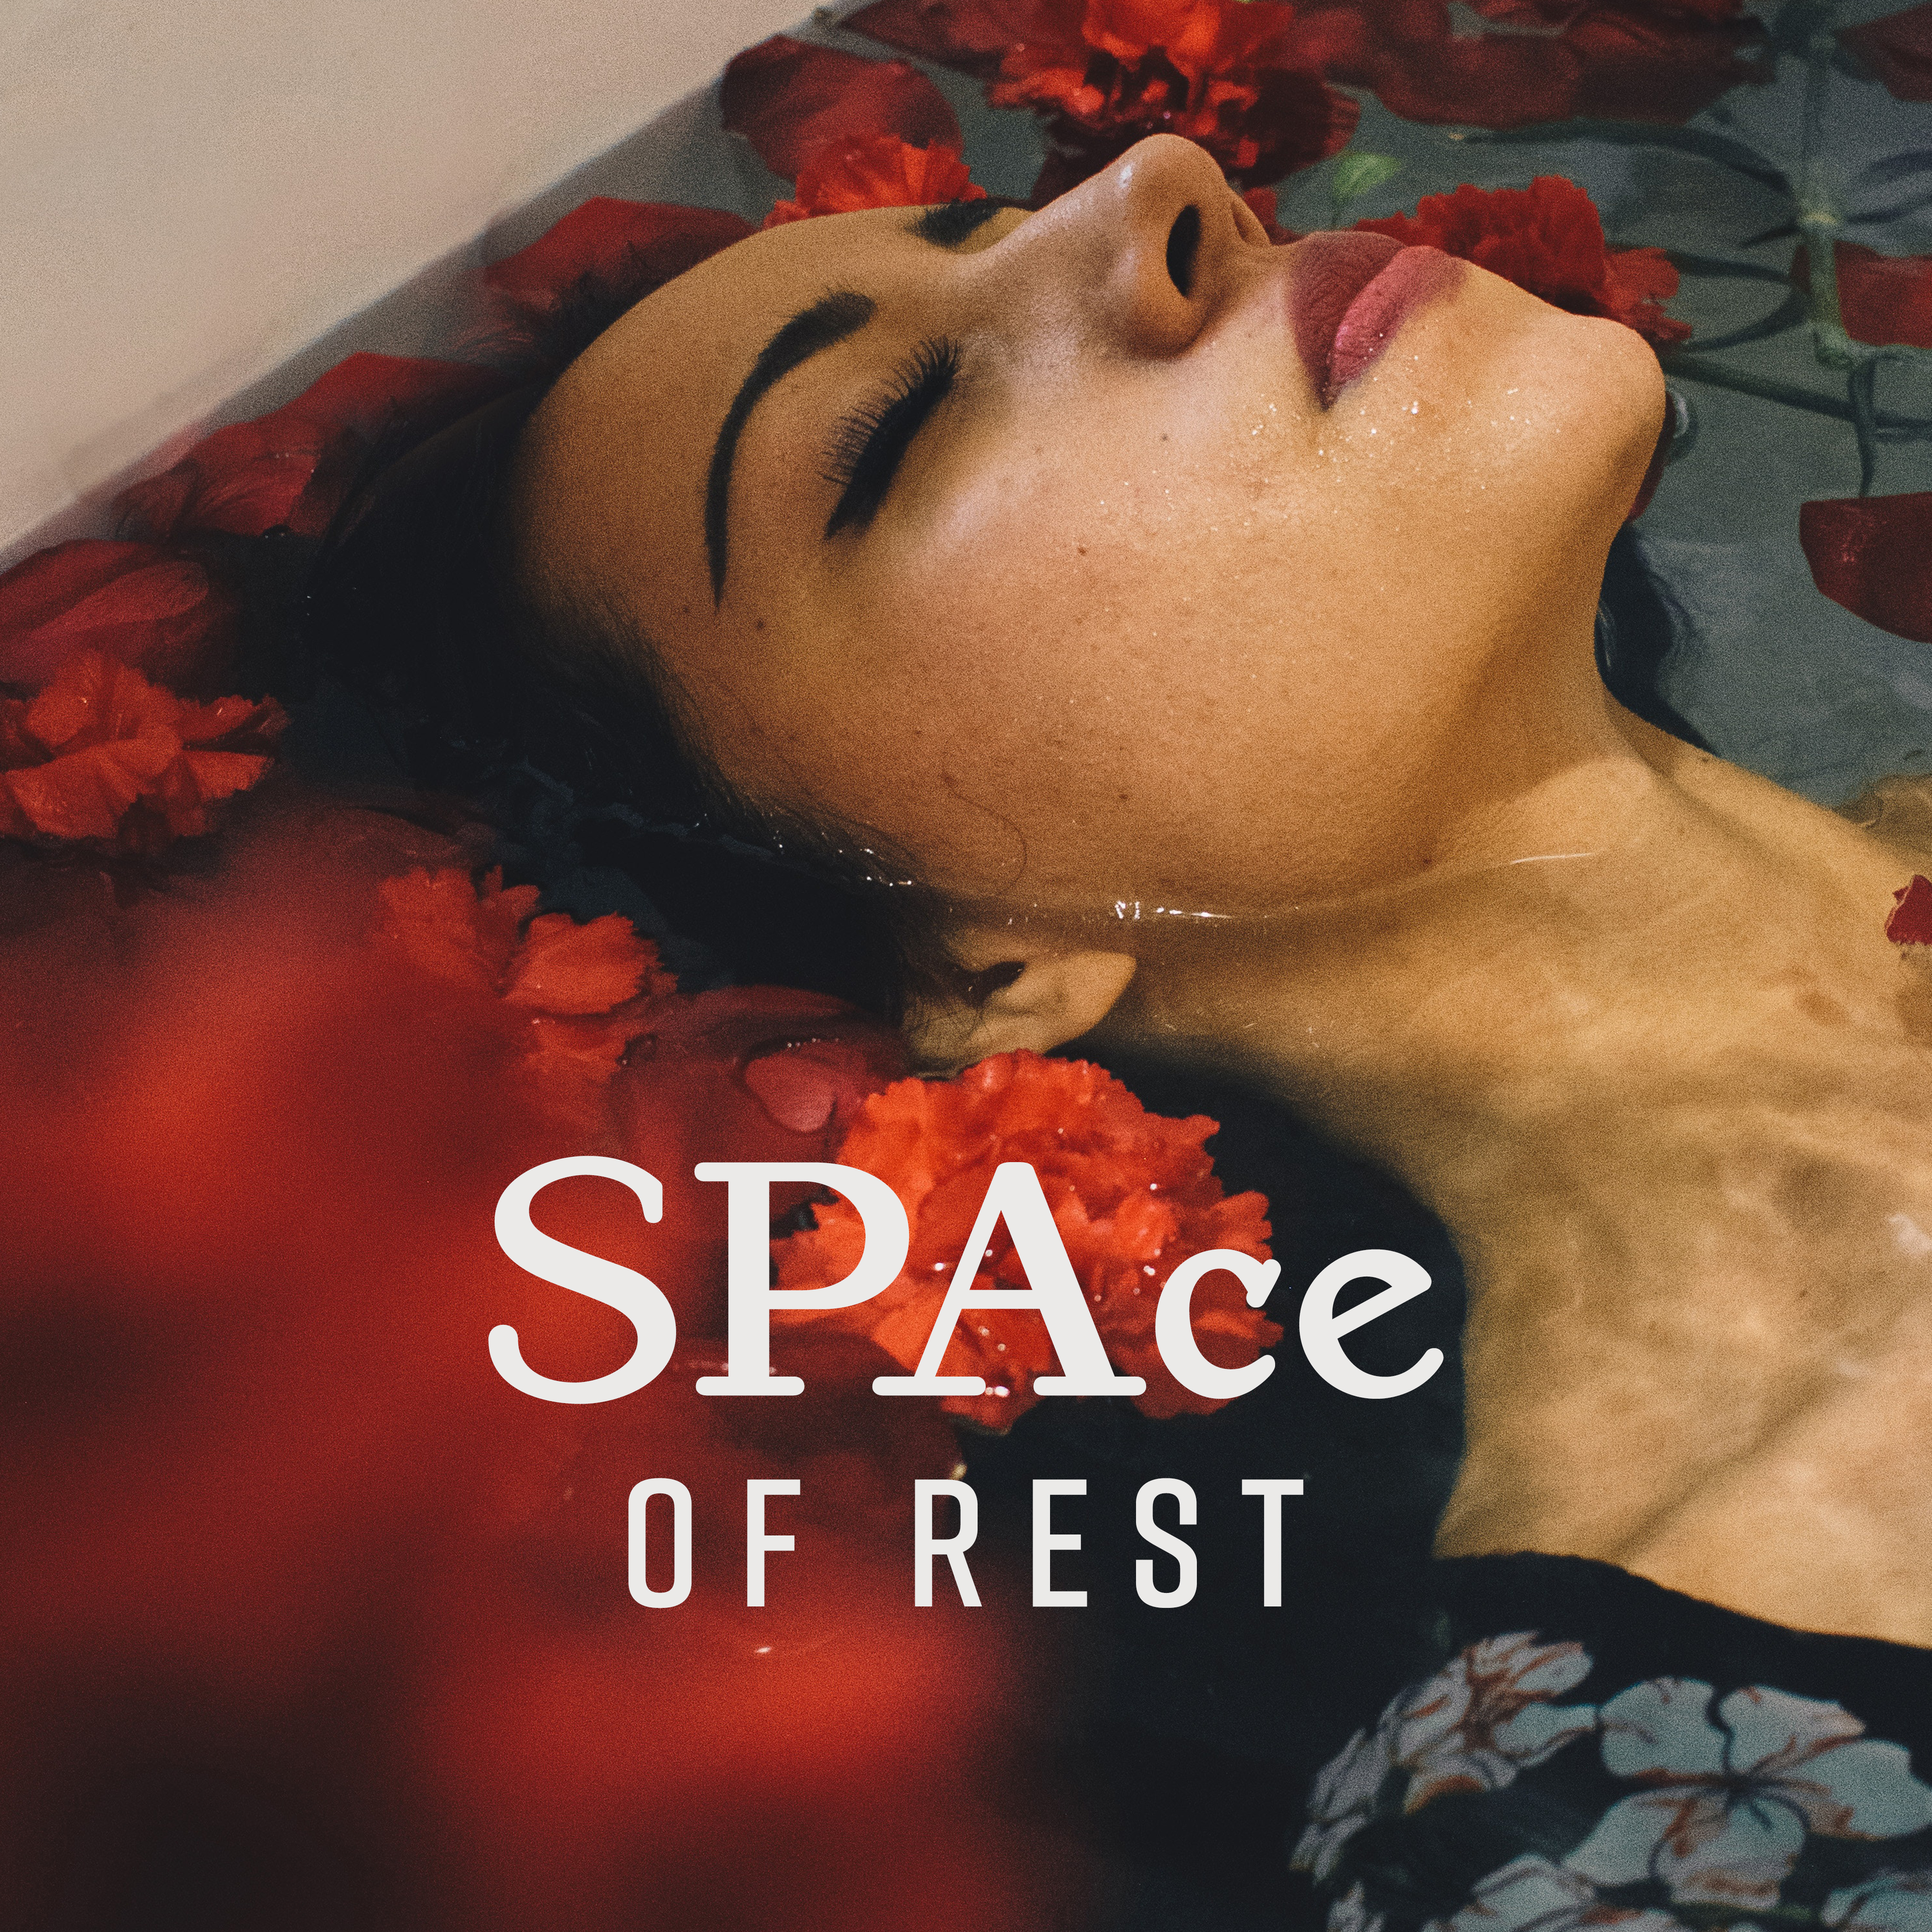 SPAce of Rest: Best Spa Melodies to Relax, Rest and Regenerate Physical and Vital Forces